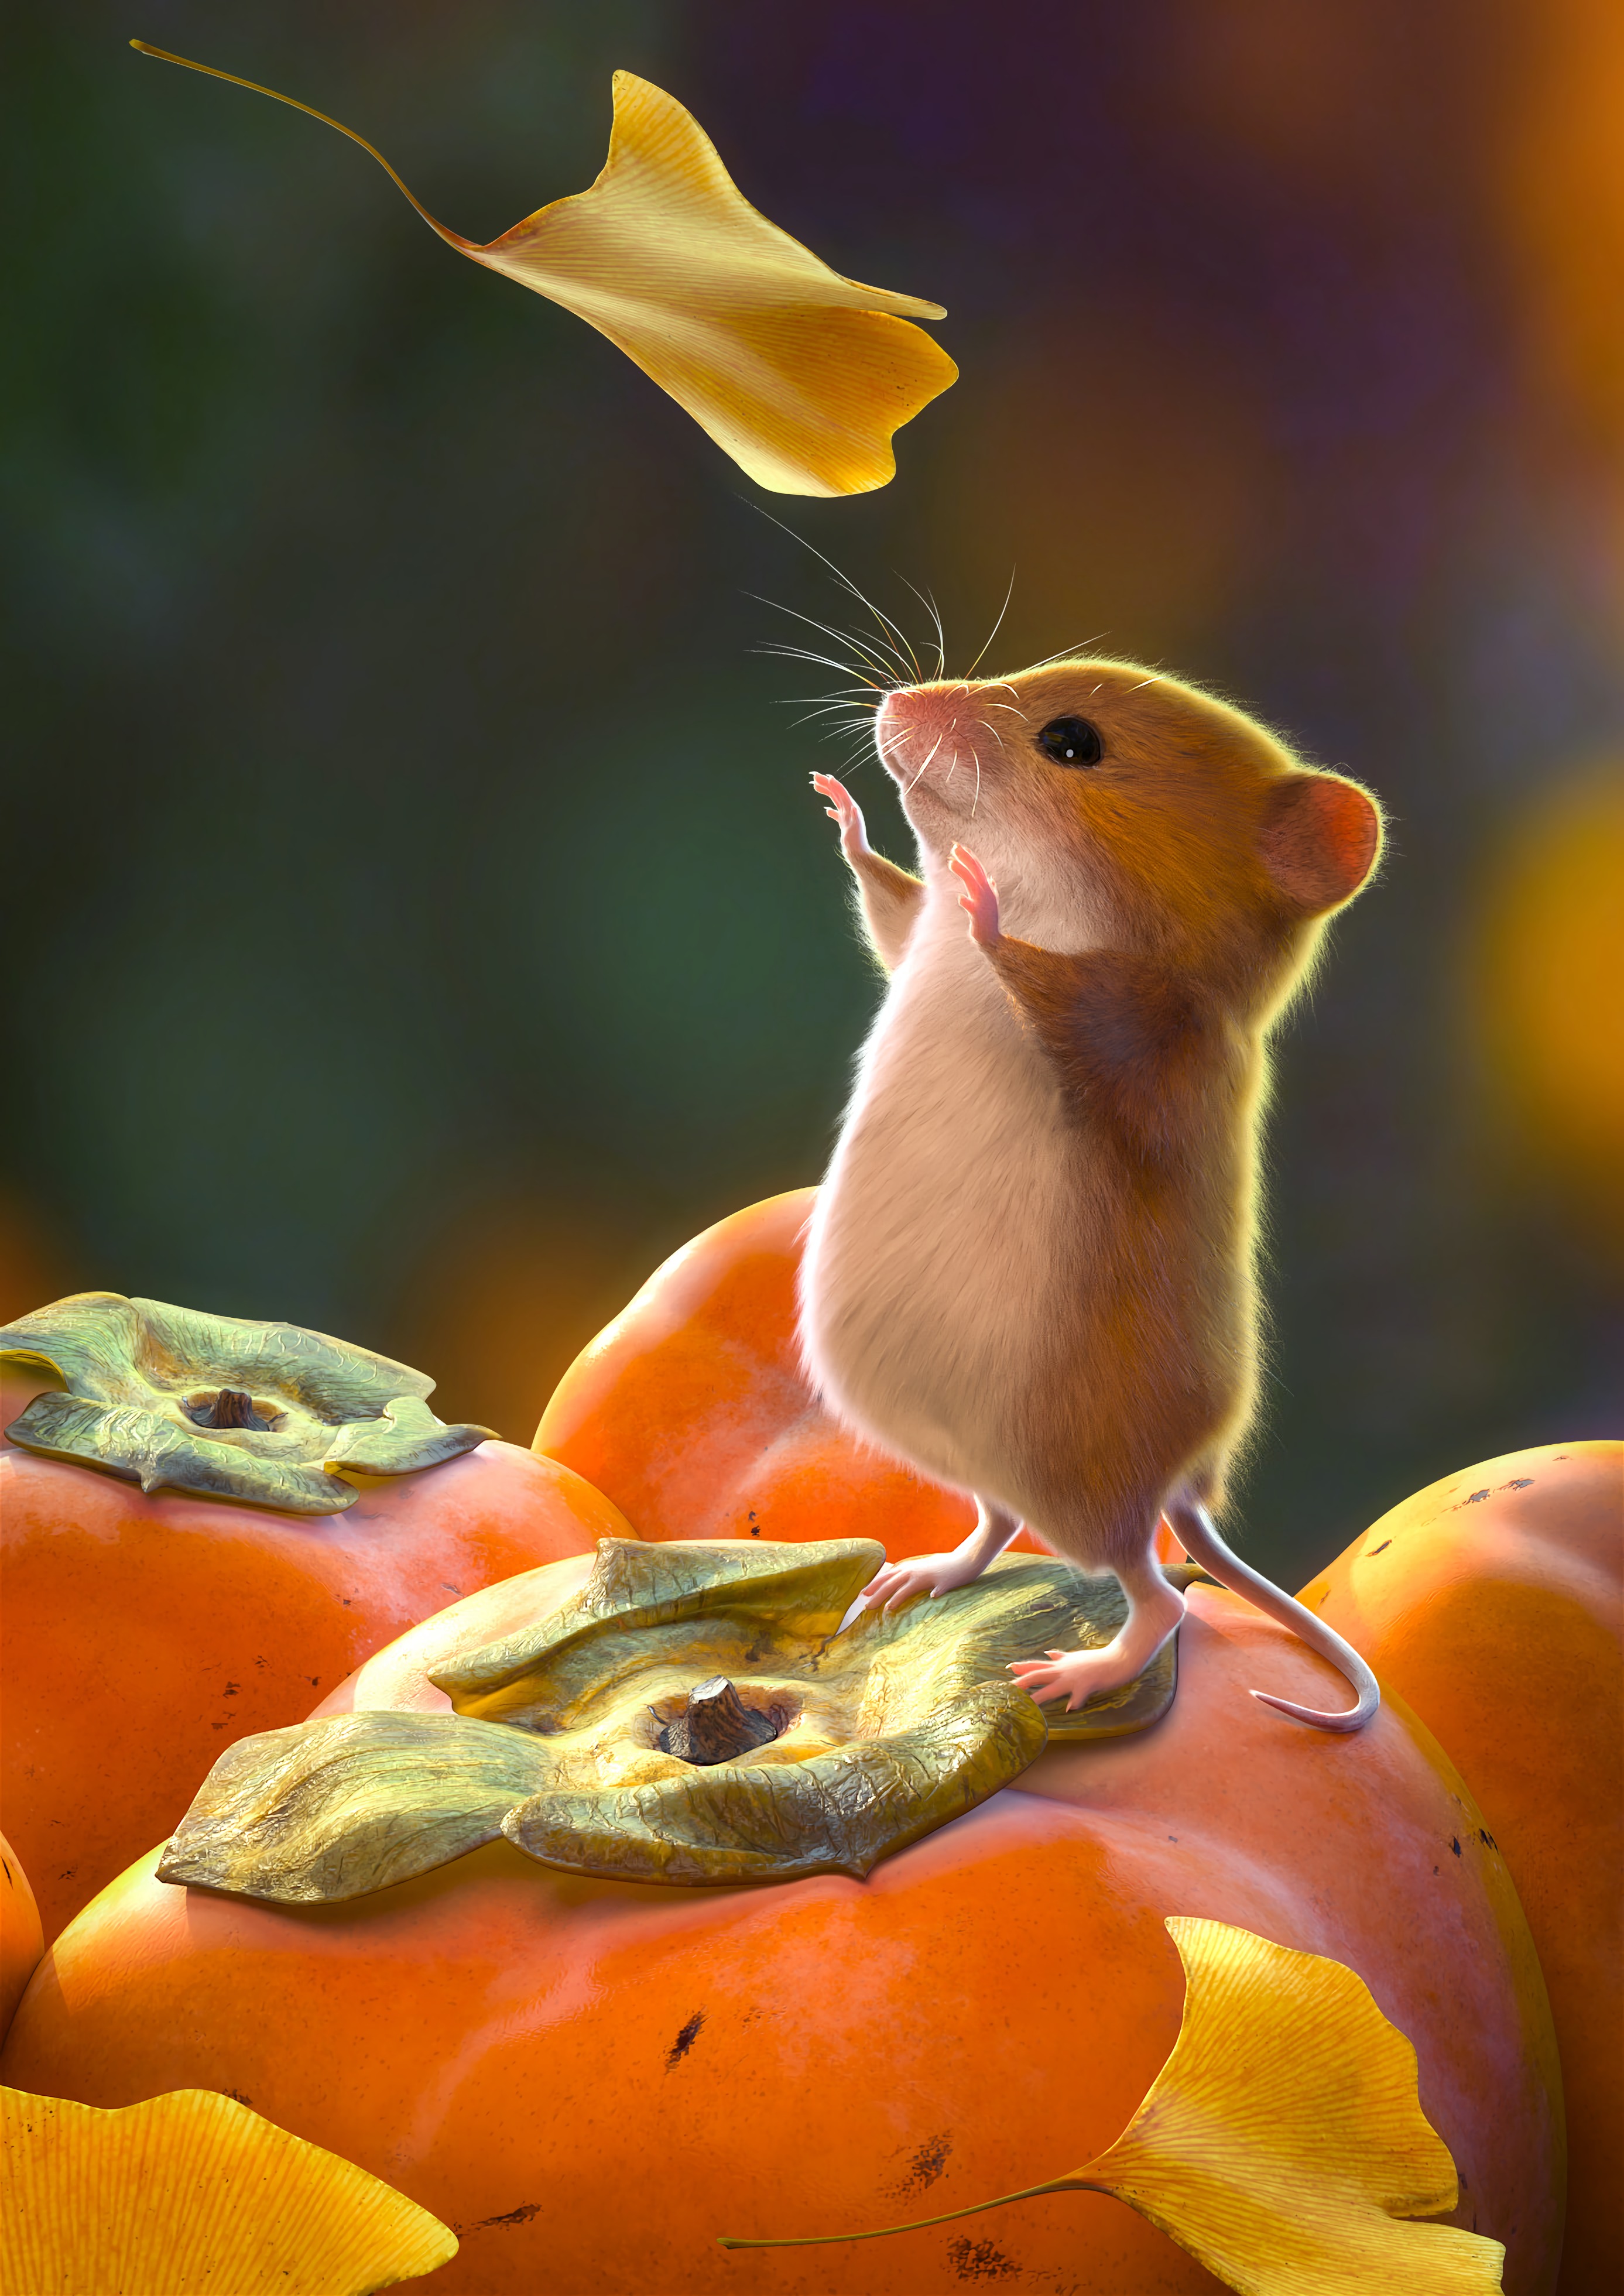 leaves, art, rodent, nice, sweetheart, mouse